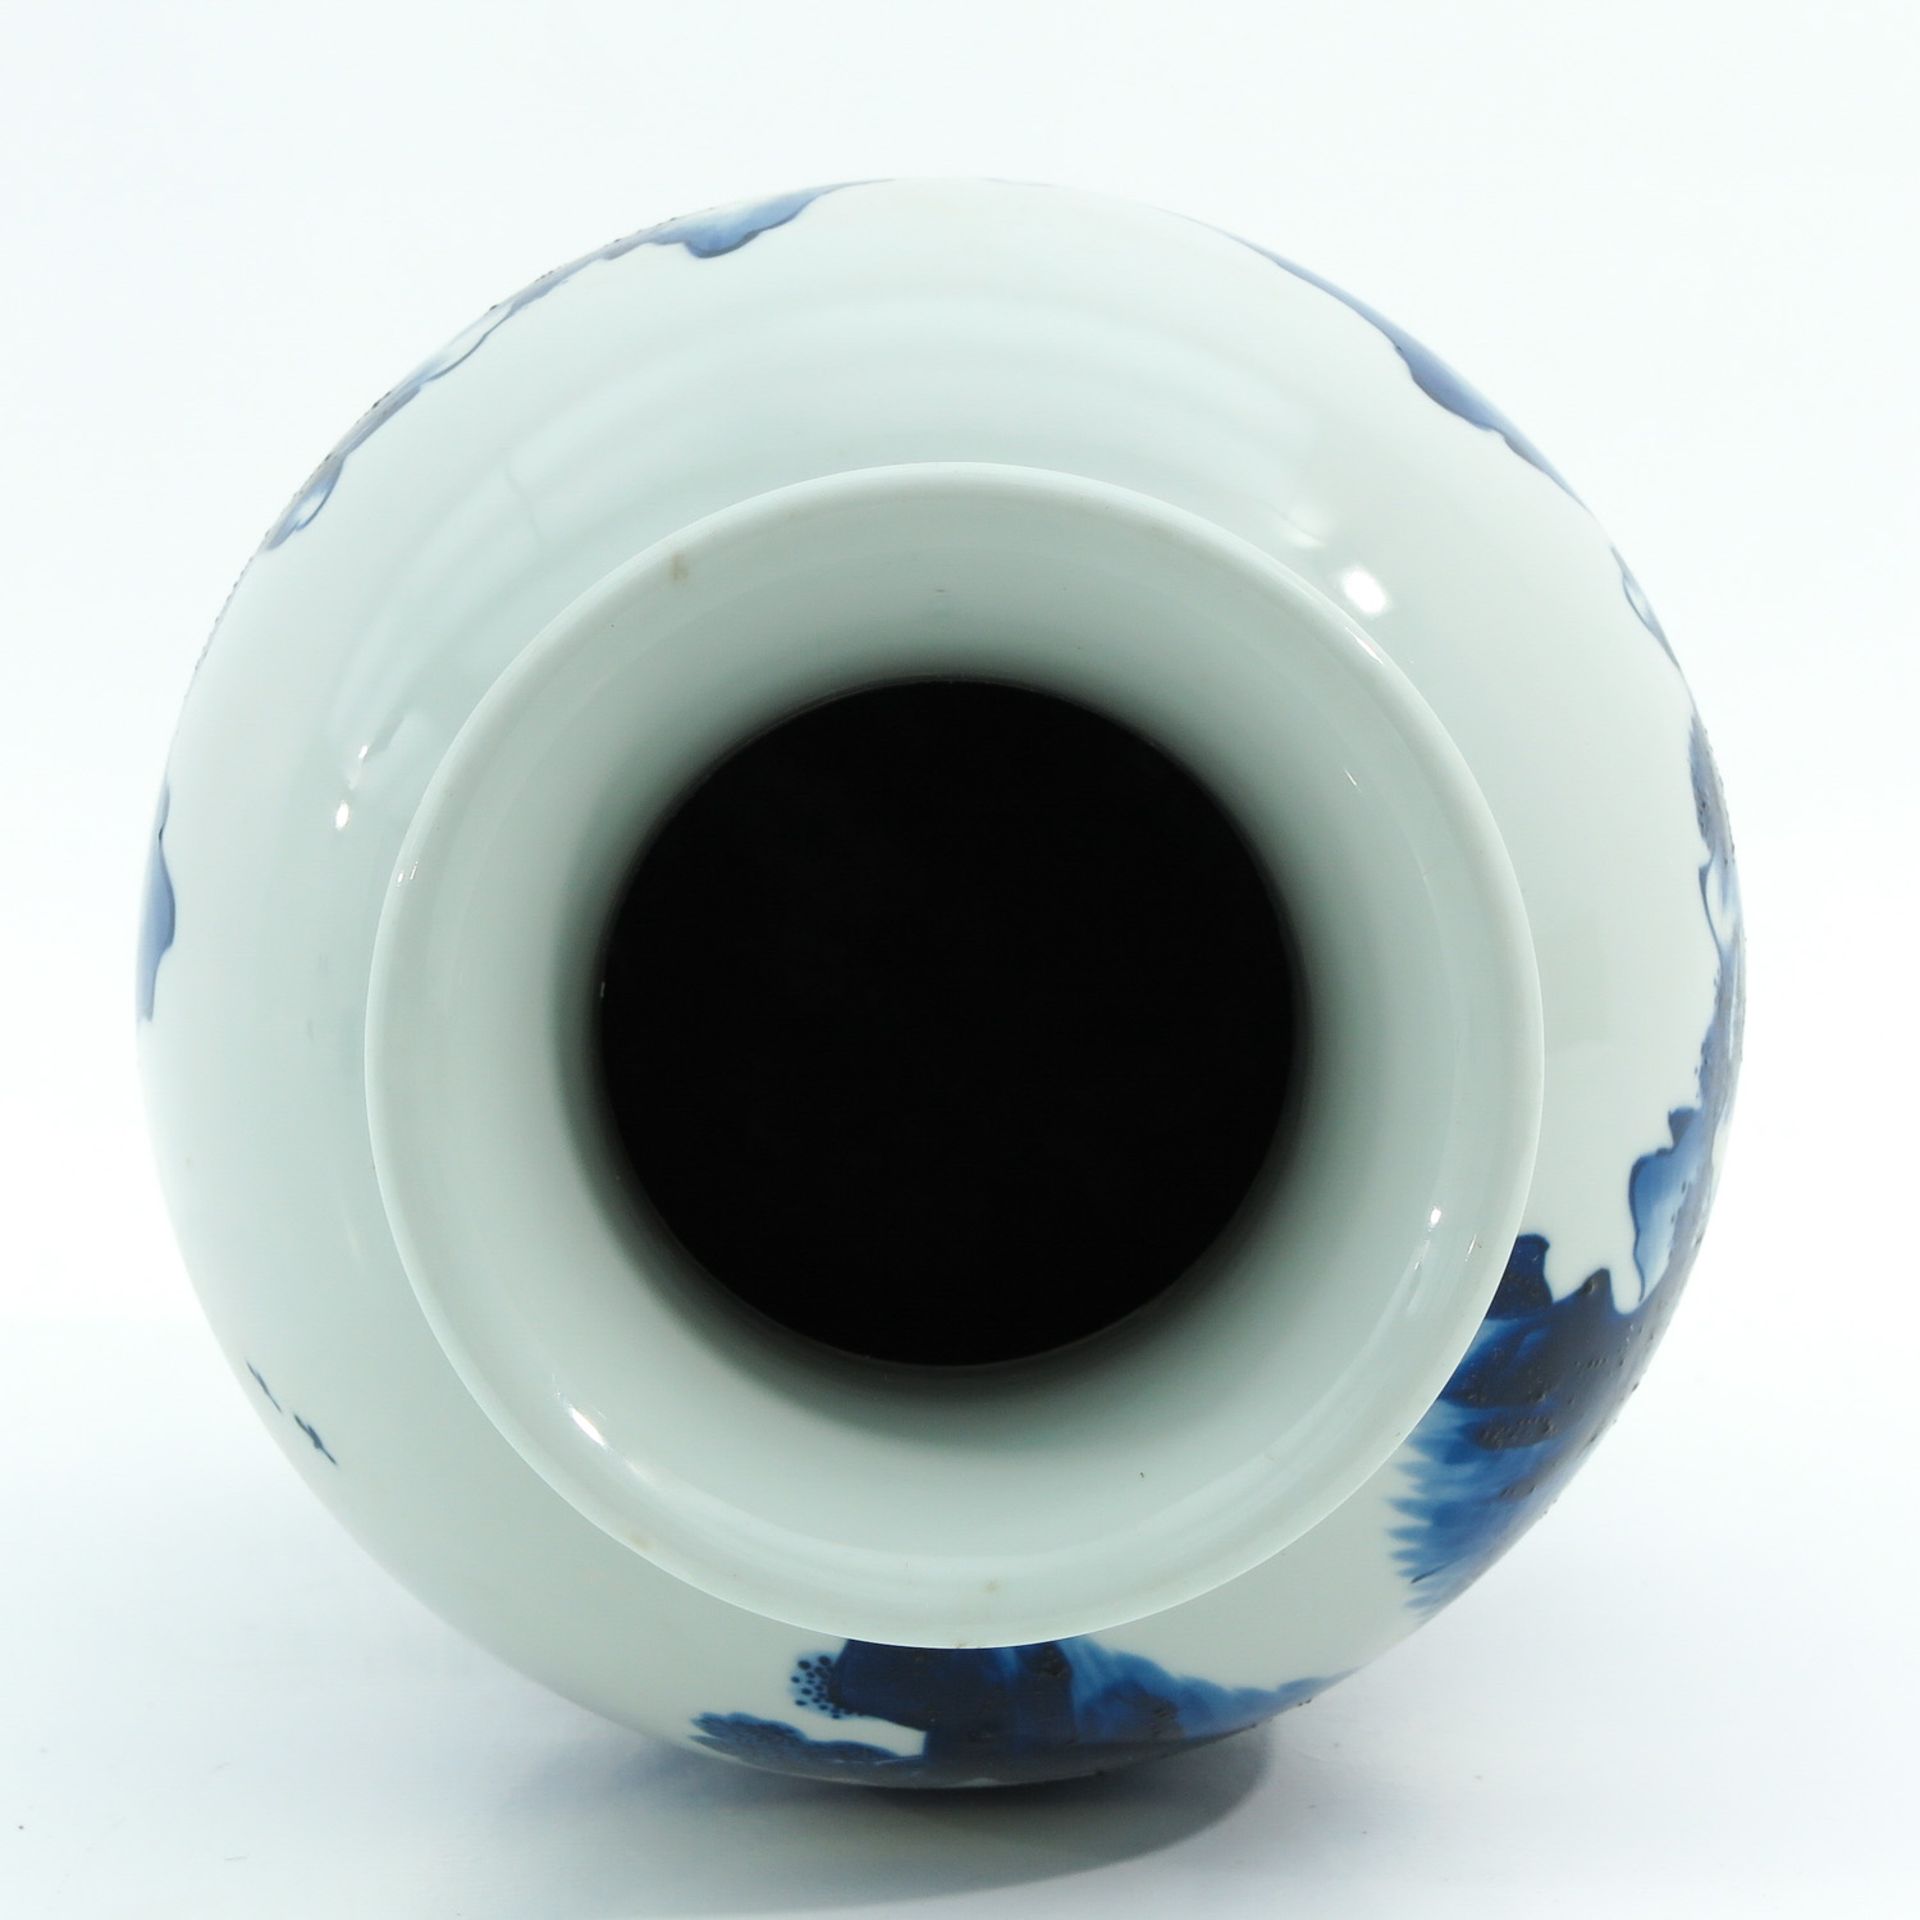 A Blue and White Vase - Image 5 of 10